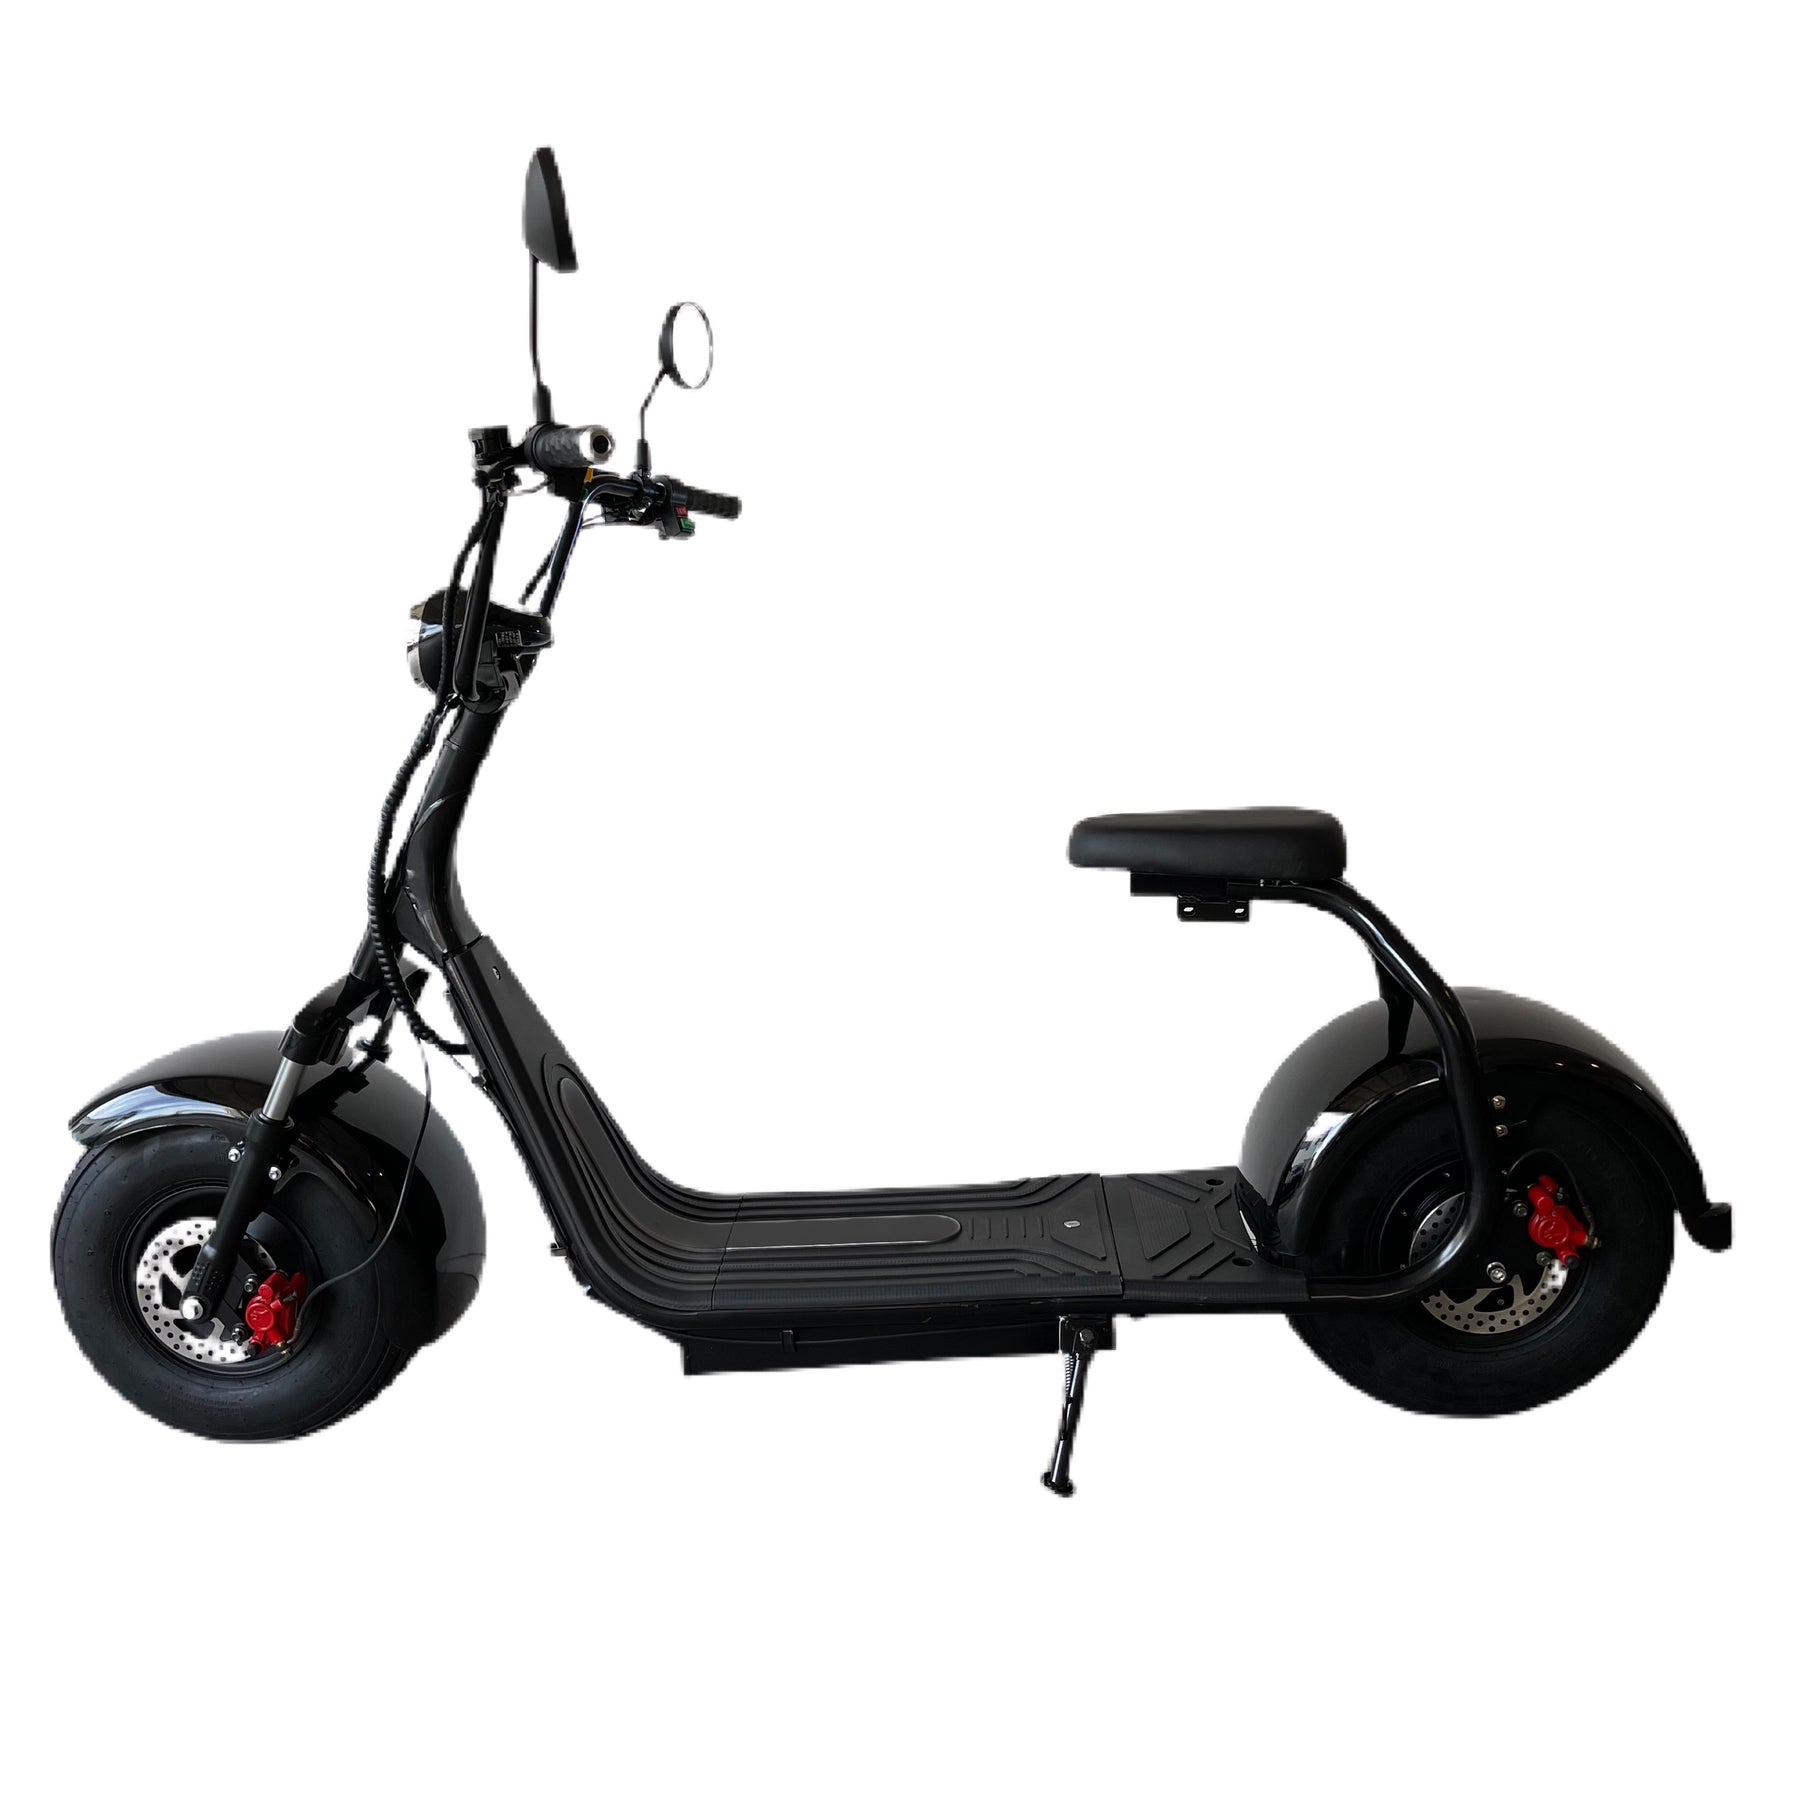 Autoscooter Magnetauto, NMIS, Produkte